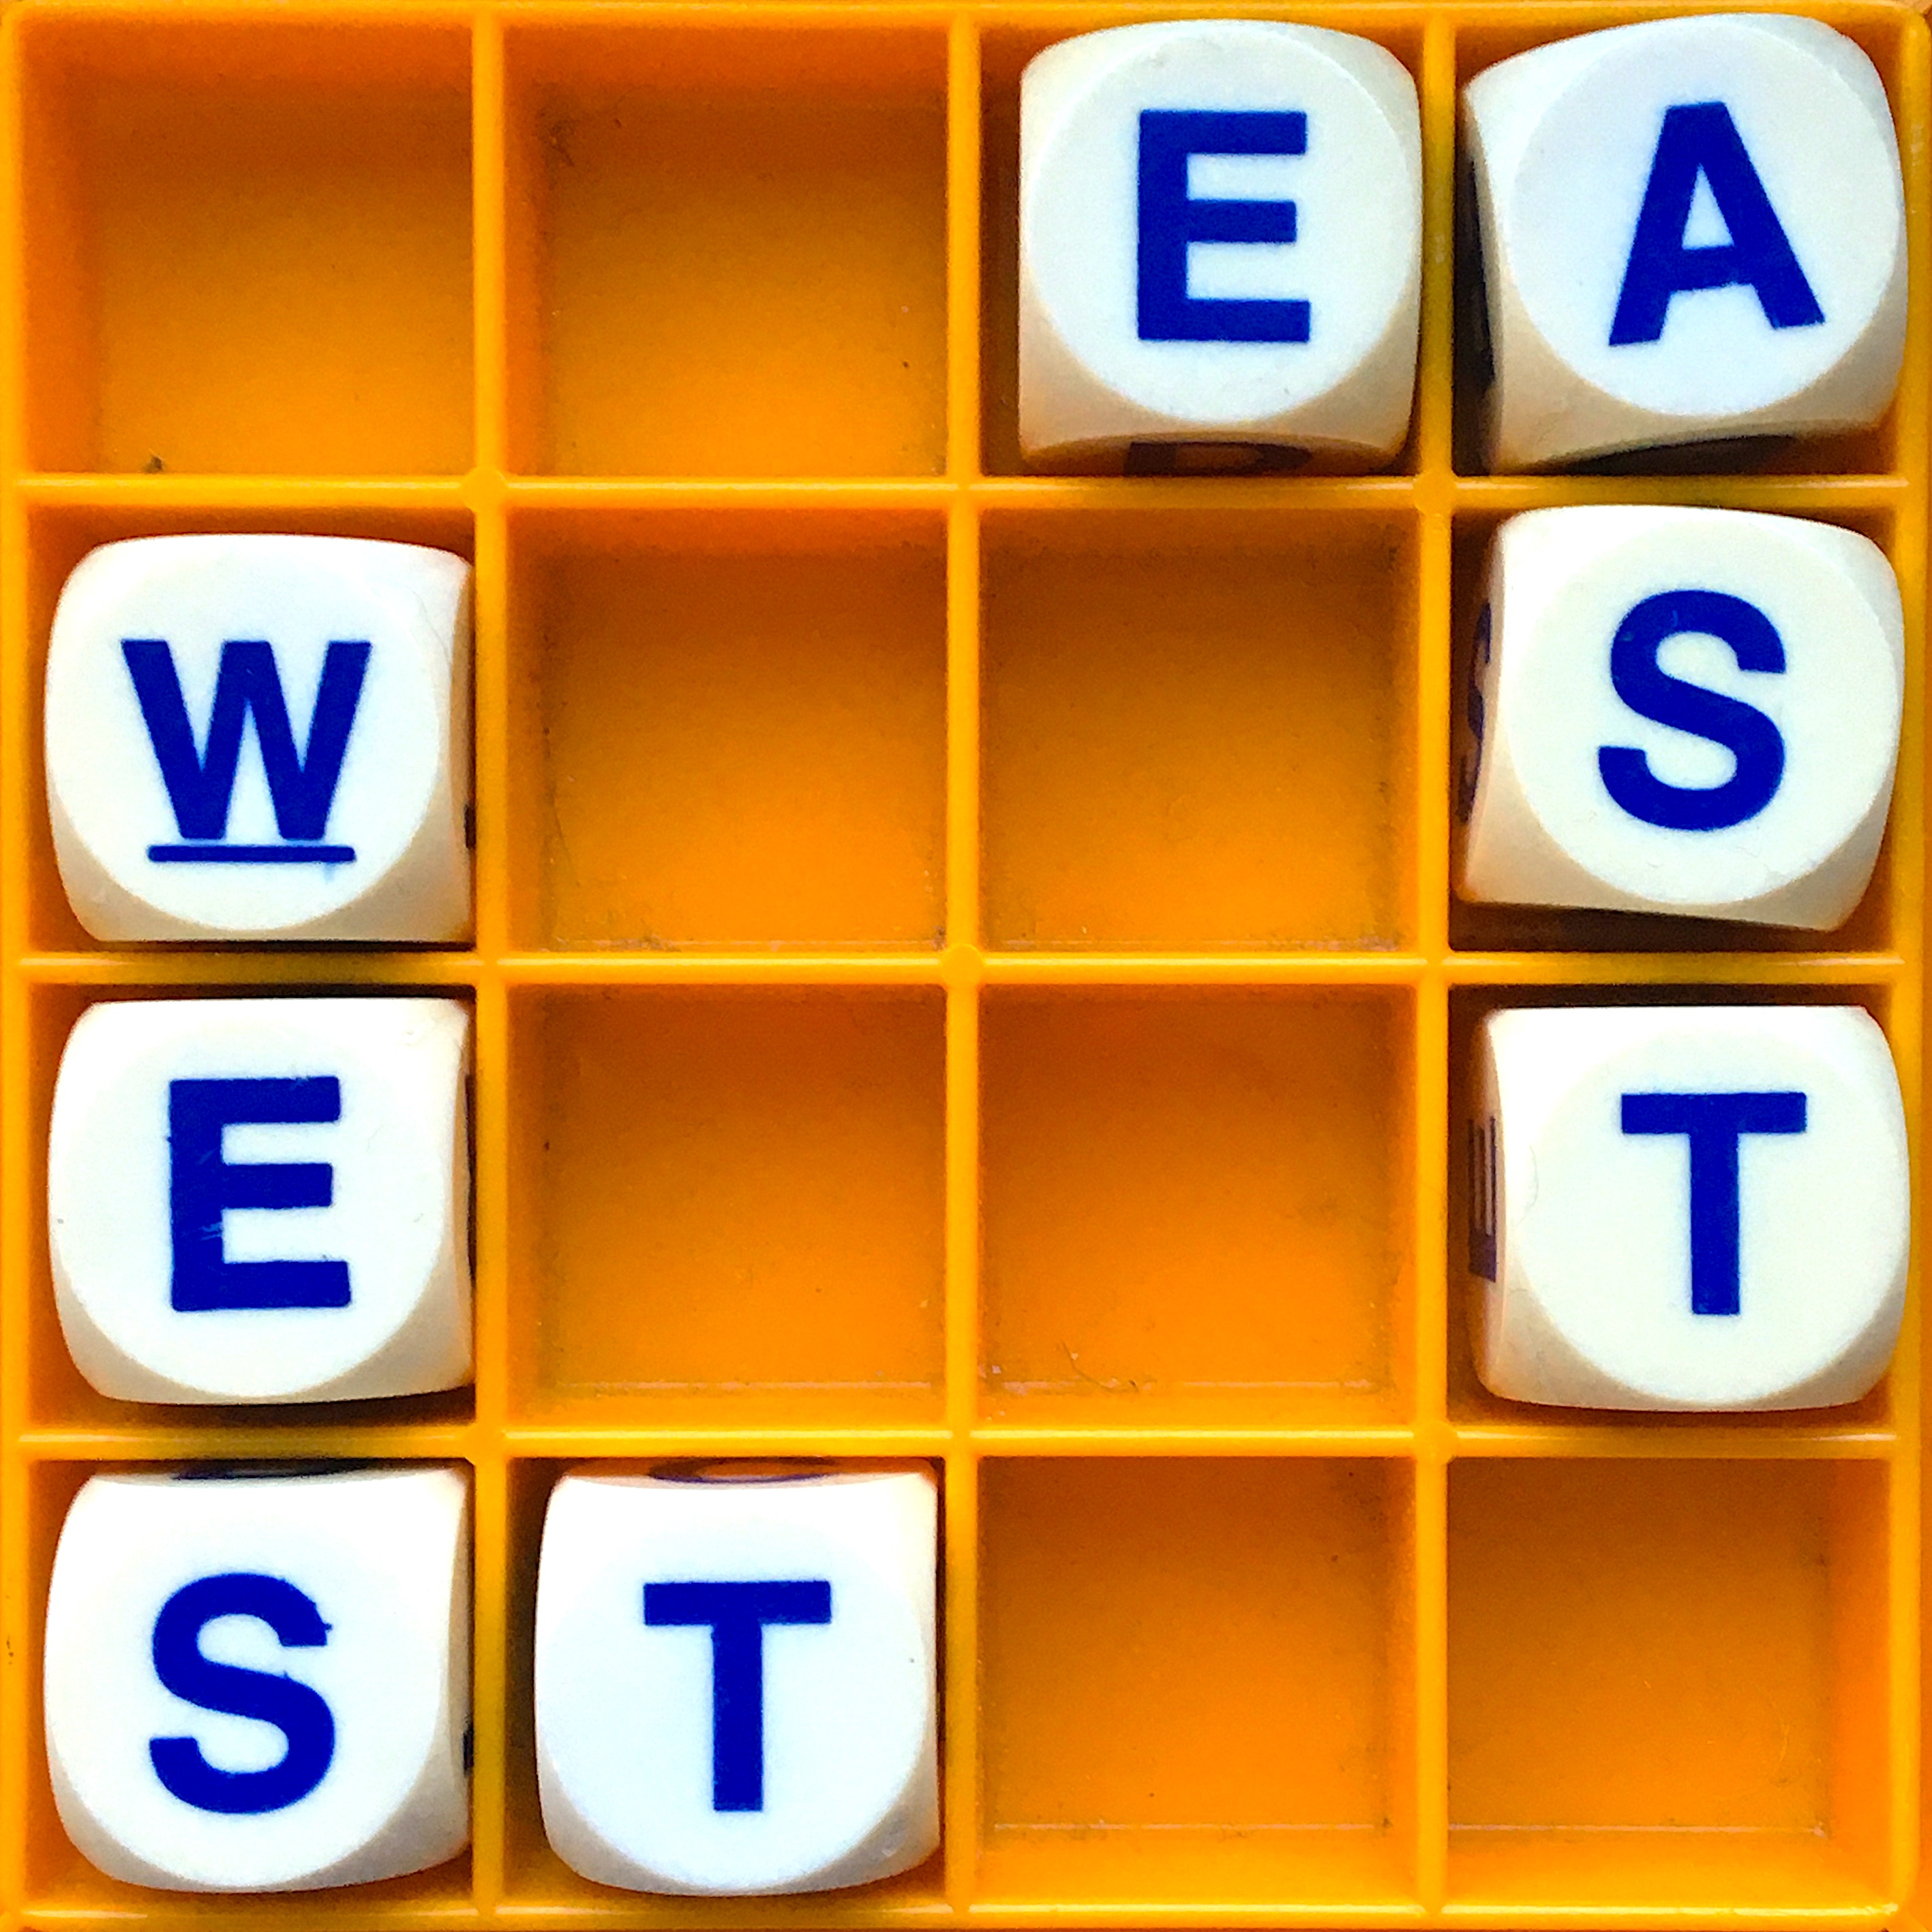 Thumbnail for "109. East West".